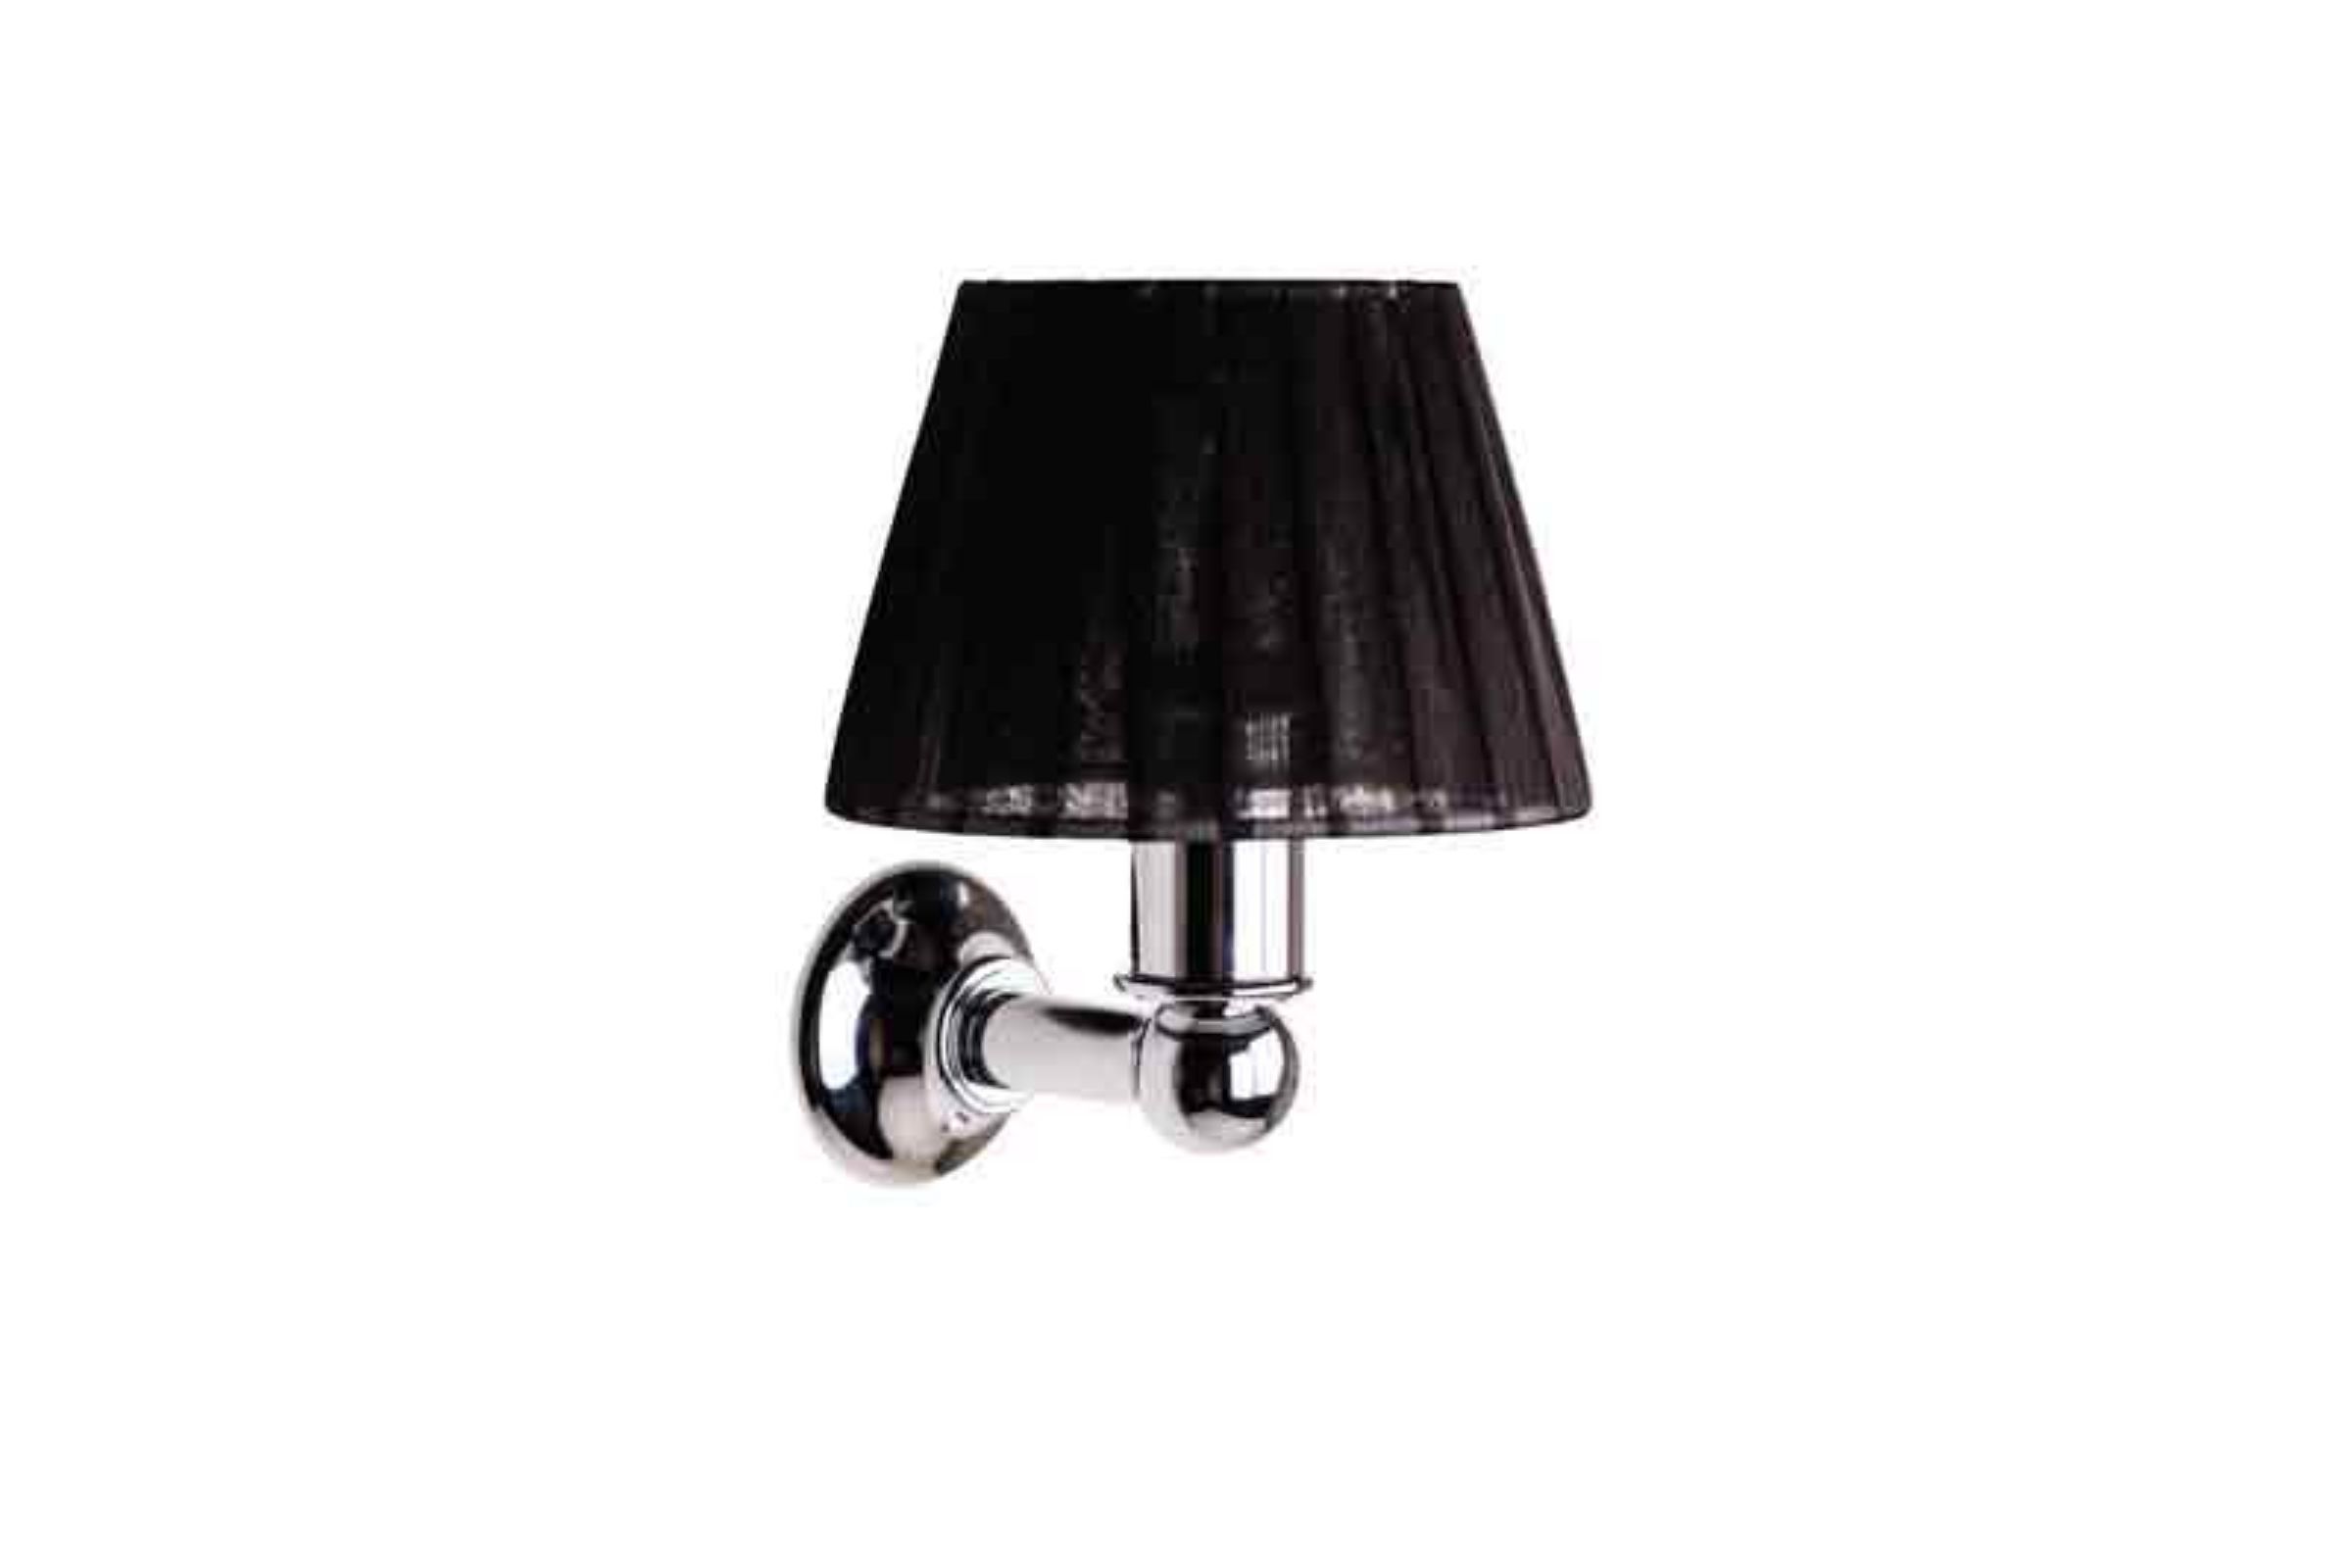 light lamp with pleated organdy lampshade wall mounted version - Applique con paralume plissettato in organza Nero